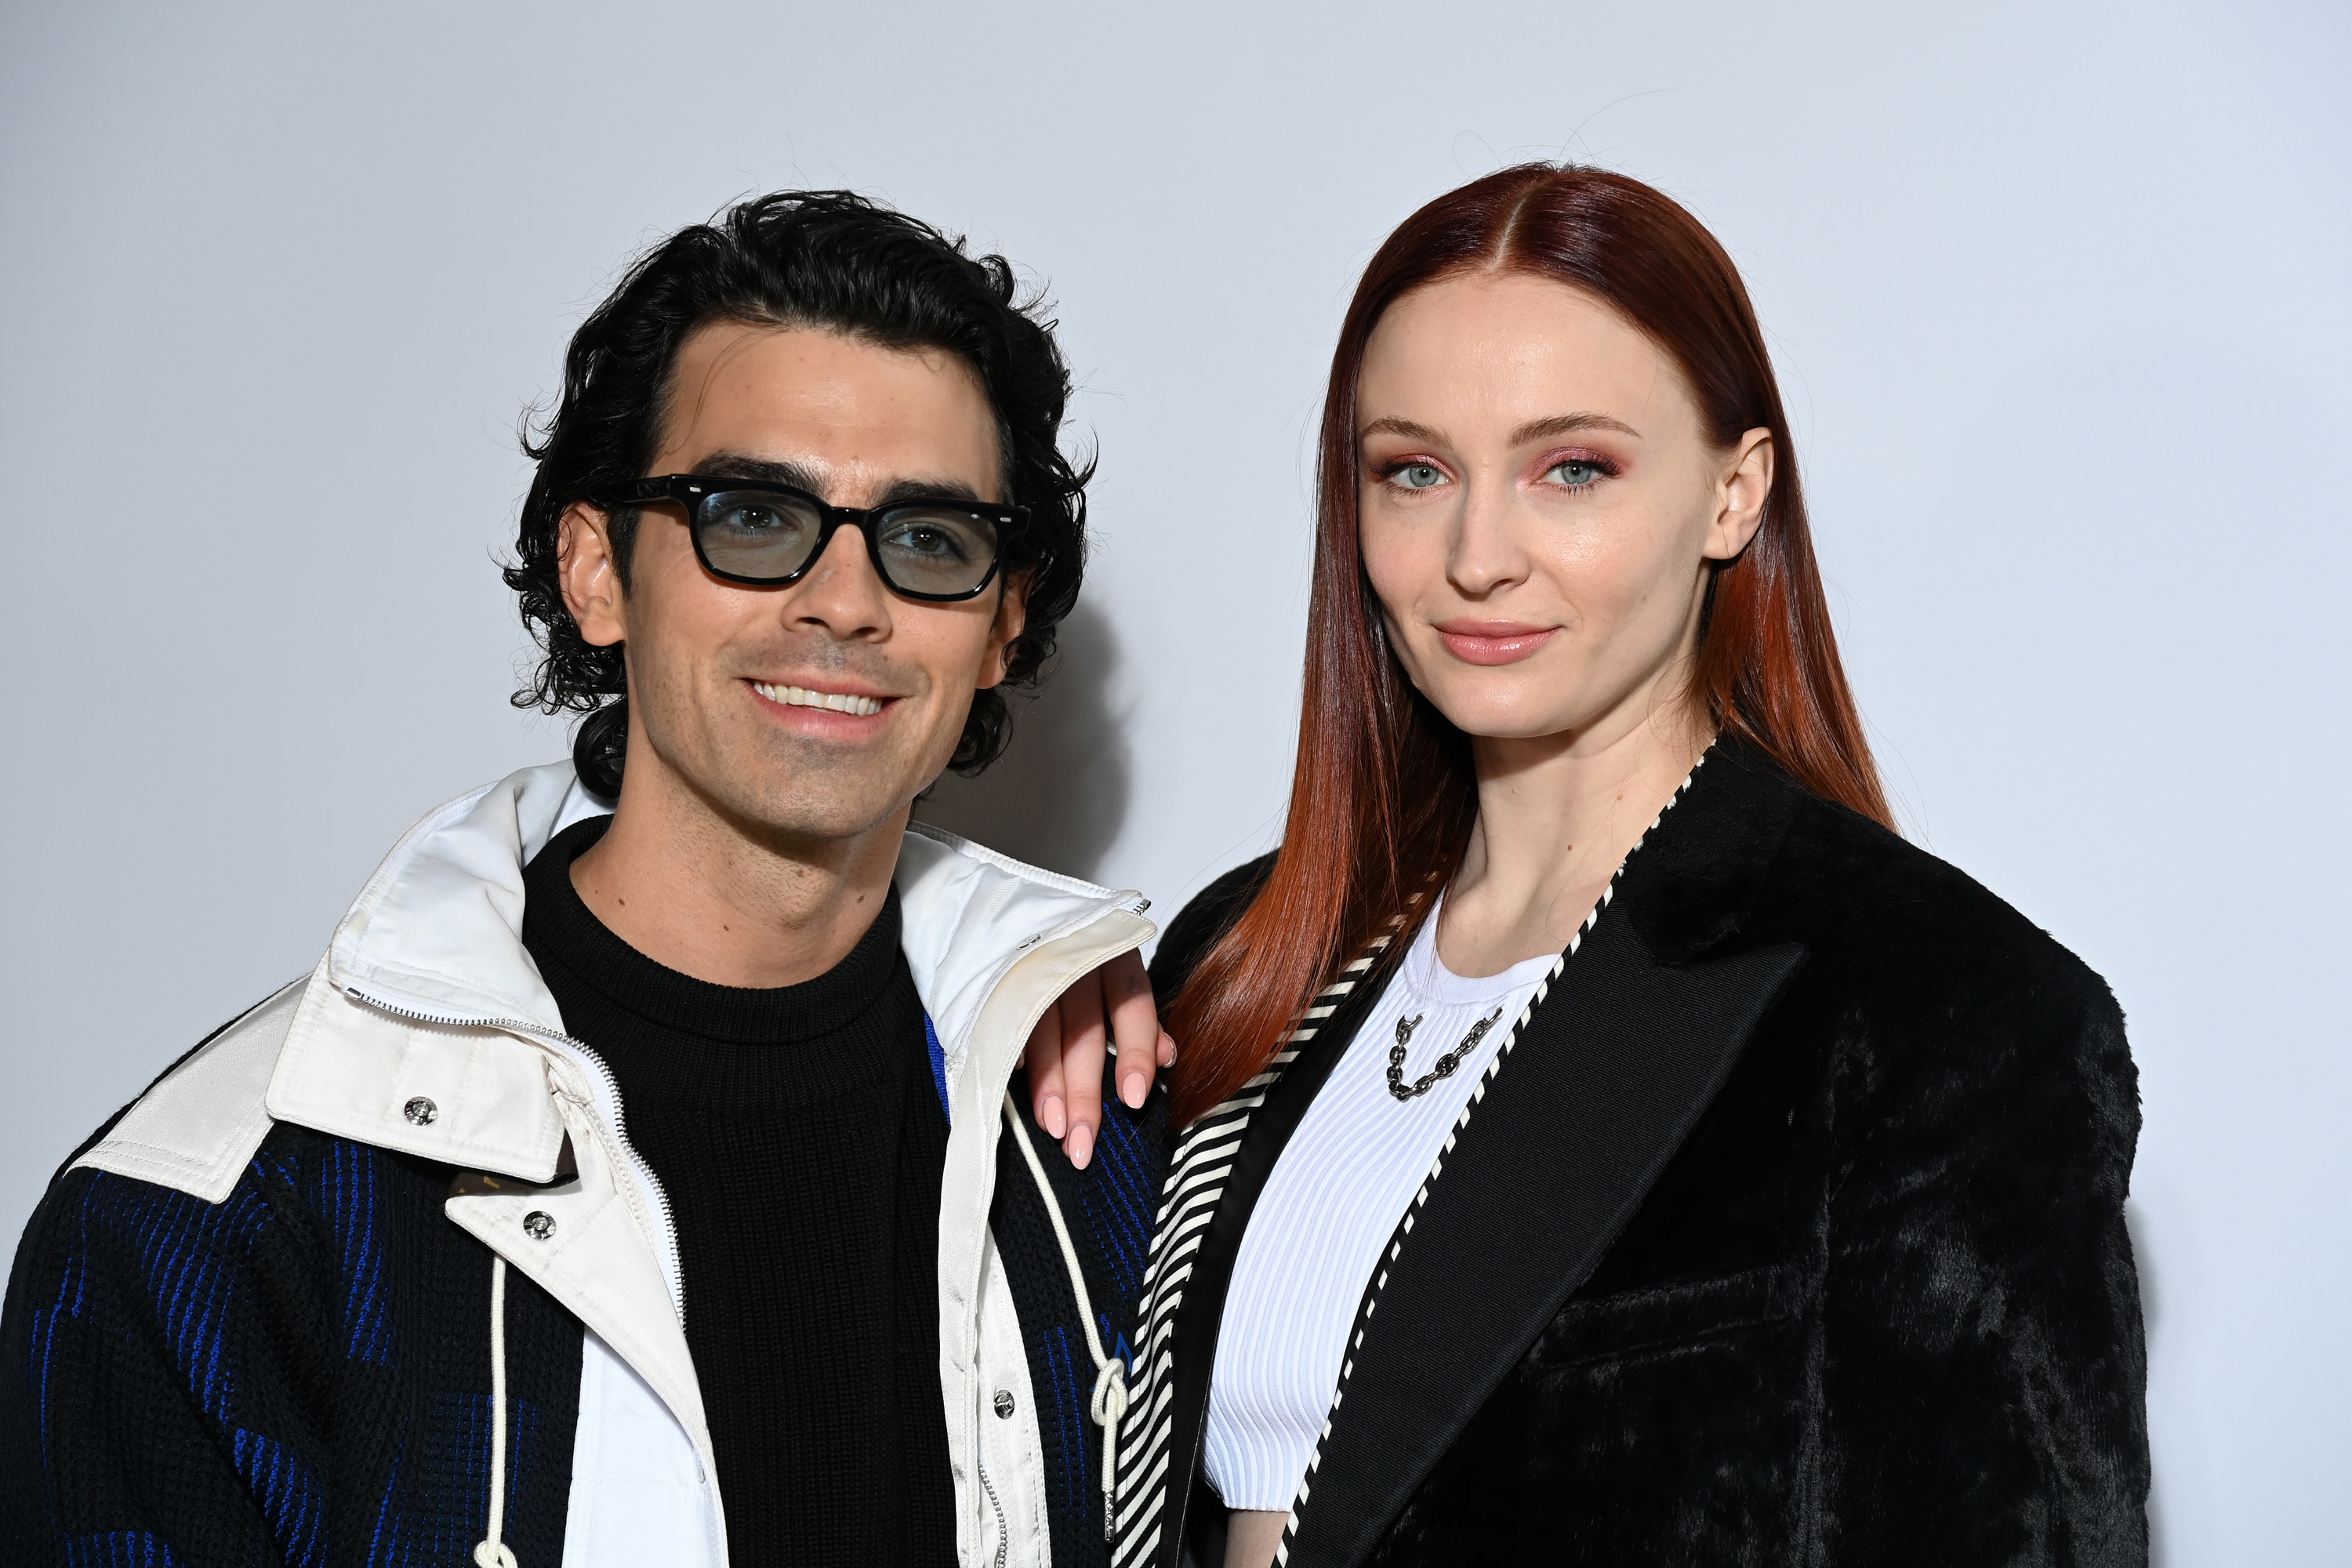 Joe Jonas and Sophie Turner attend a party